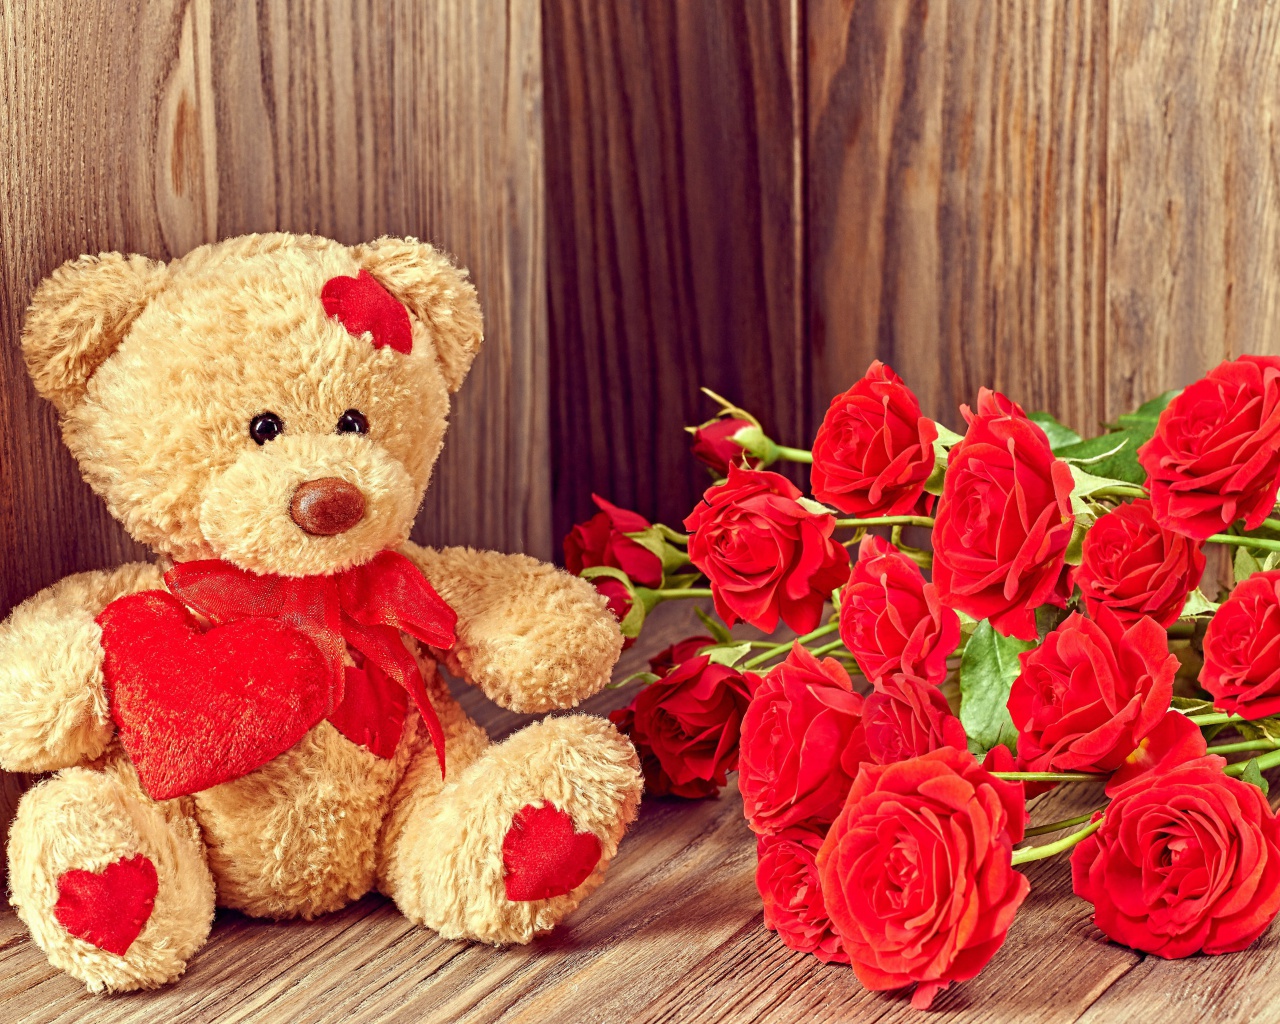 Brodwn Teddy Bear Gift for Saint Valentines Day wallpaper 1280x1024